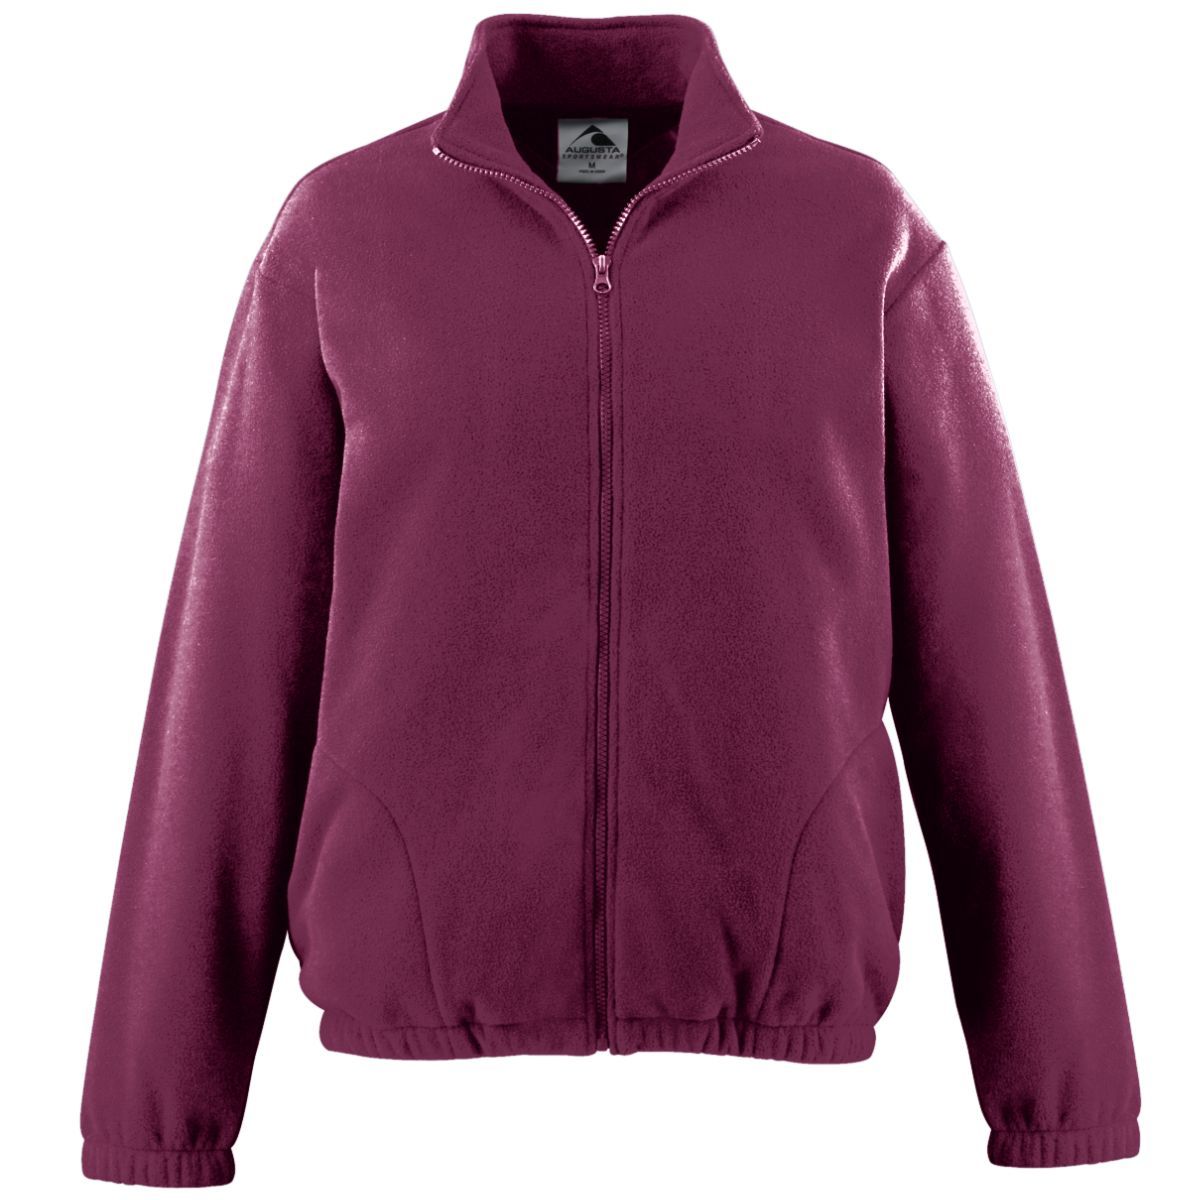 Augusta Sportswear Youth Chill Fleece Full Zip Jacket in Maroon  -Part of the Youth, Youth-Jacket, Augusta-Products, Outerwear product lines at KanaleyCreations.com